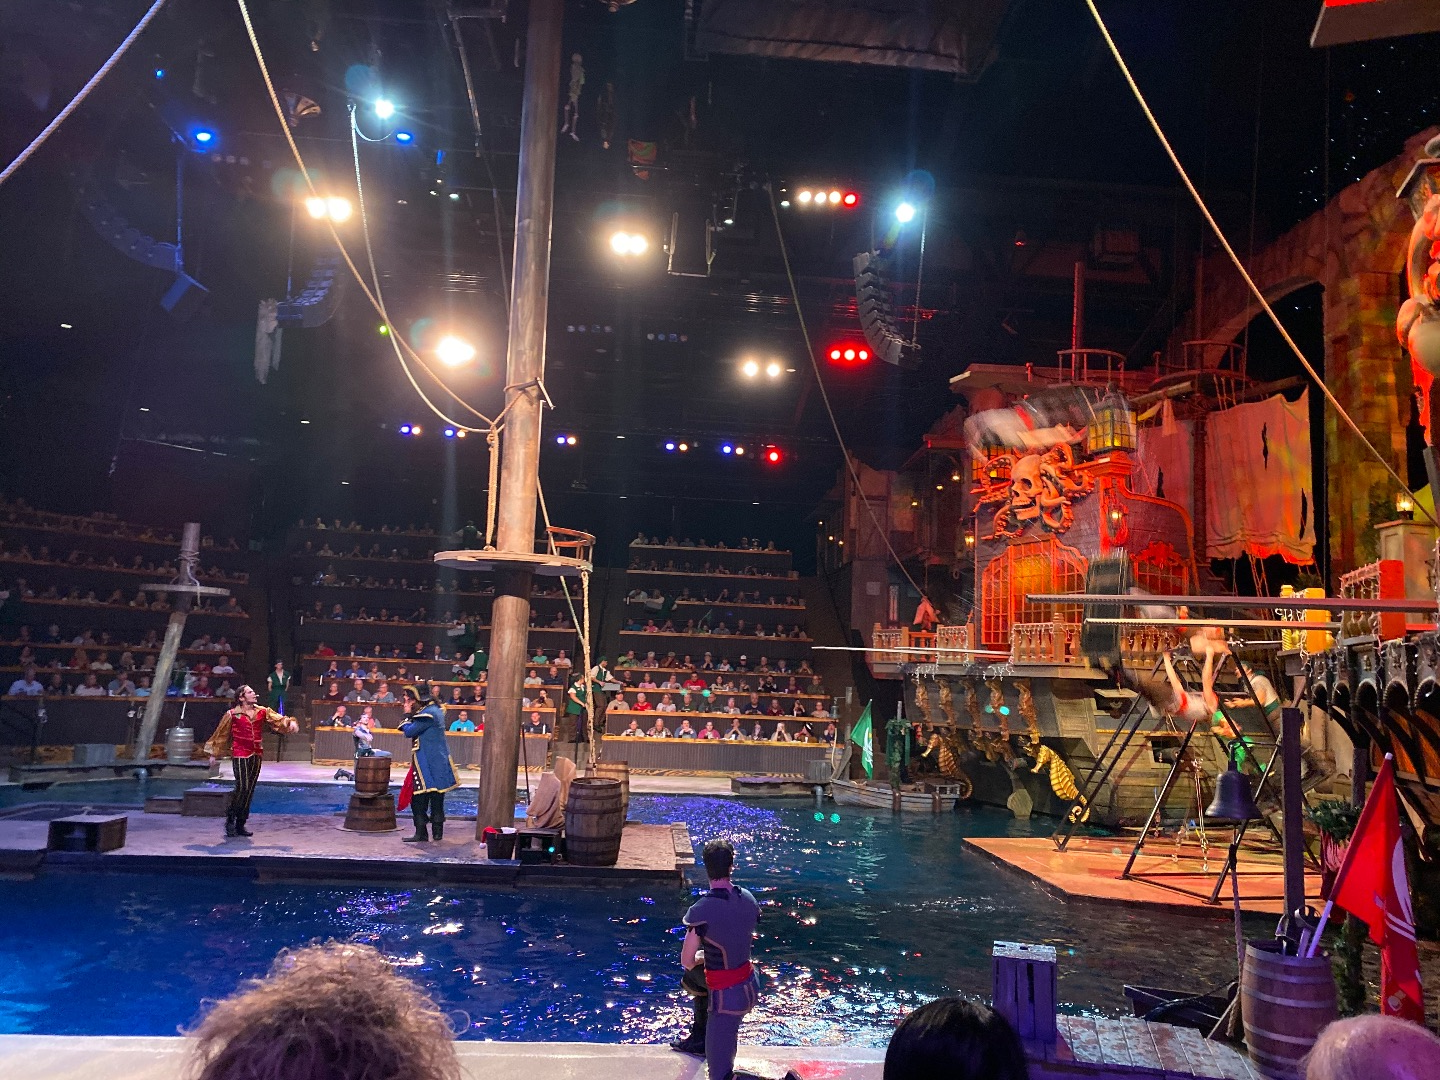 pirates voyage in pigeon forge tn